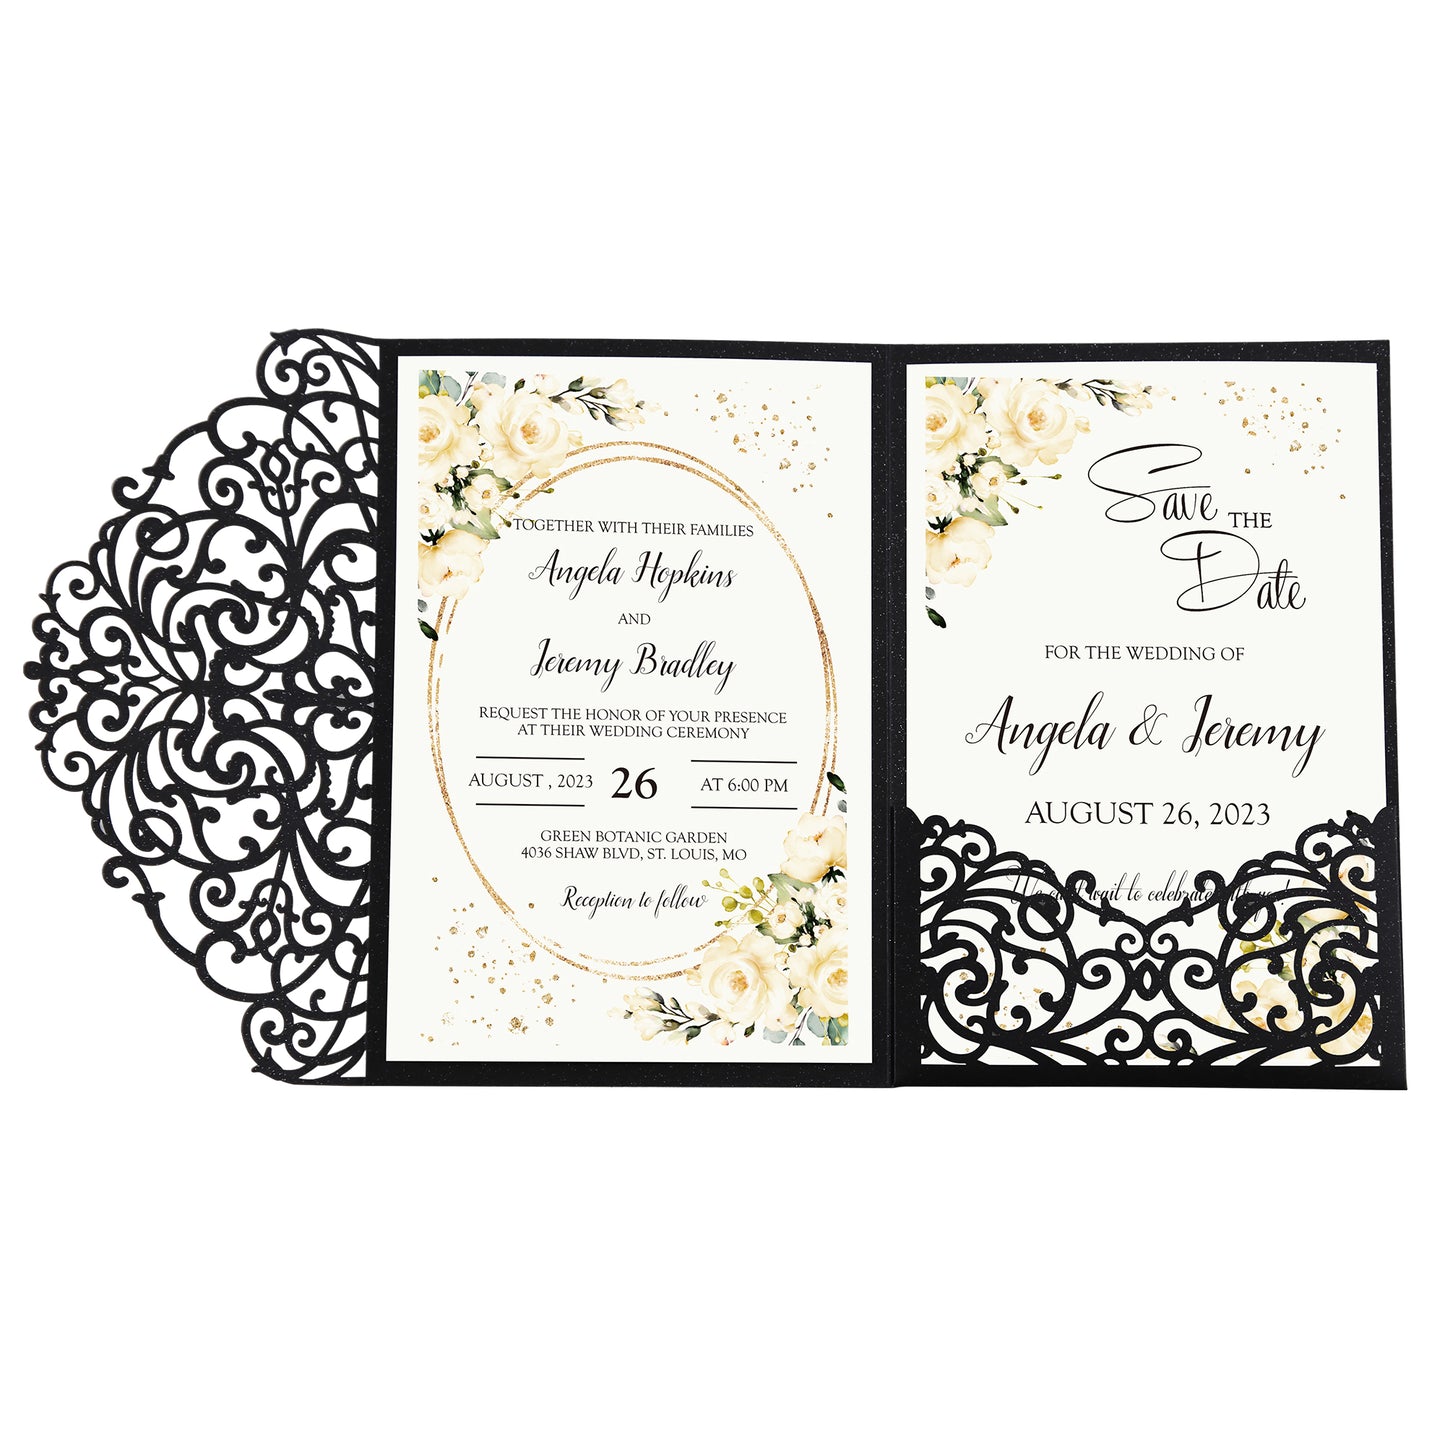 4.7 x7 inch Black Laser Cut Hollow Rose Wedding Invitations Cards with Envelopes for Wedding Party